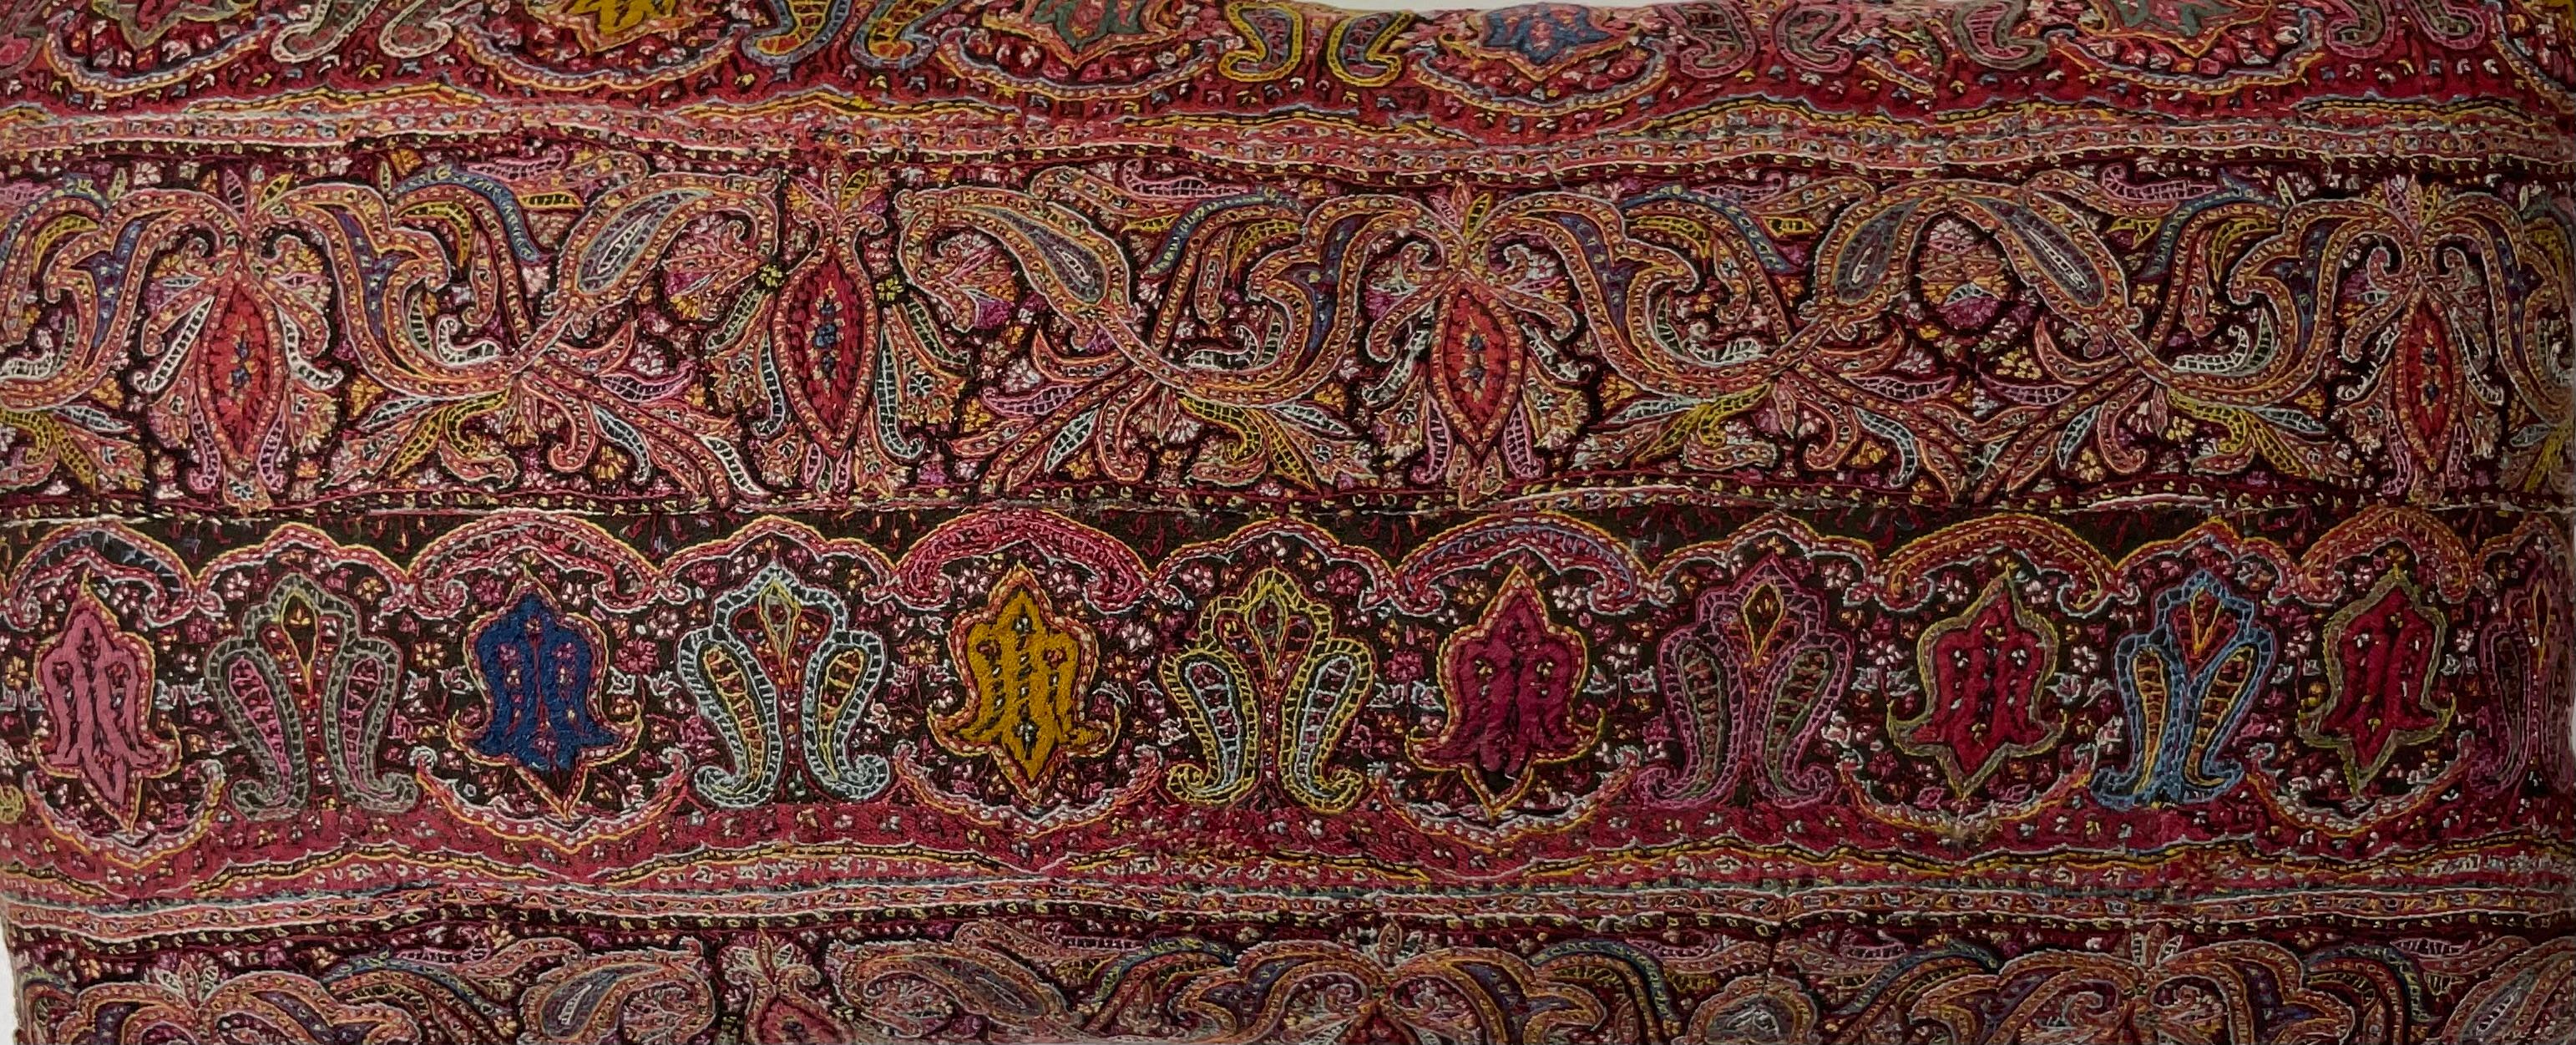 Embroidered Single Hand Embroidery Persian Suzani Pillow For Sale